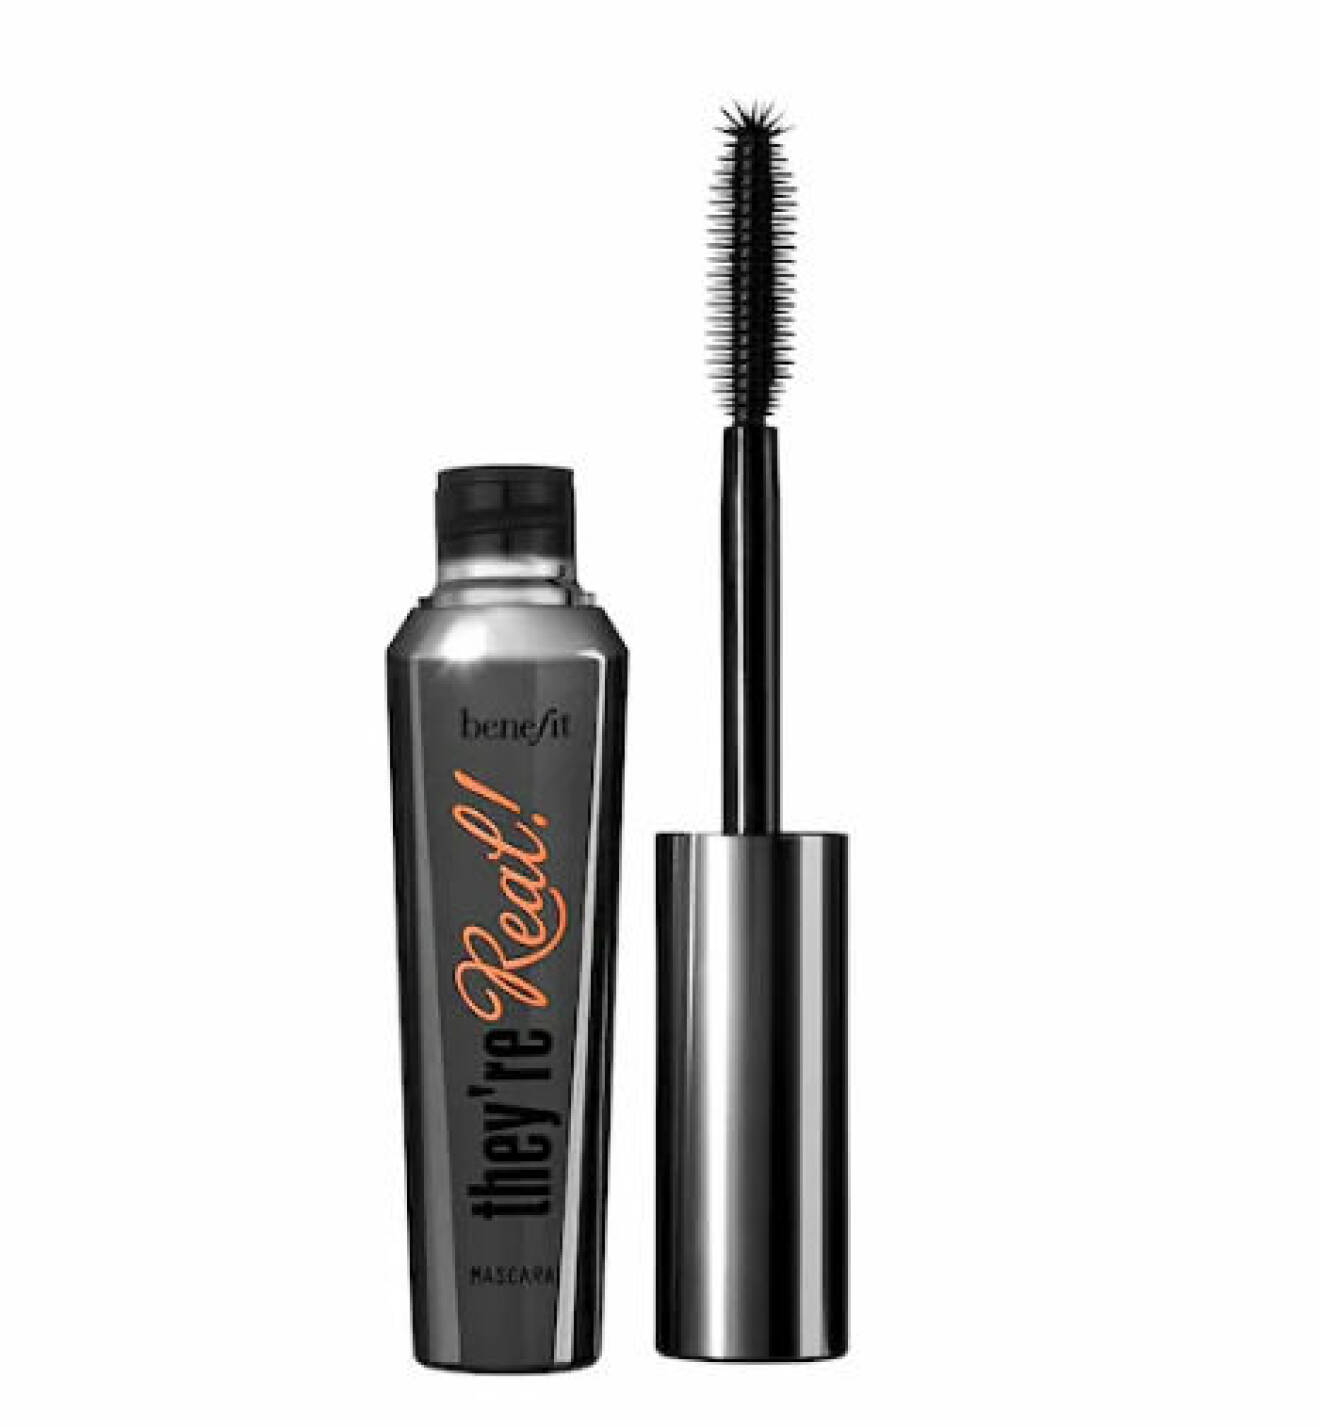 They're Real Lengthening Mascara från Benefit